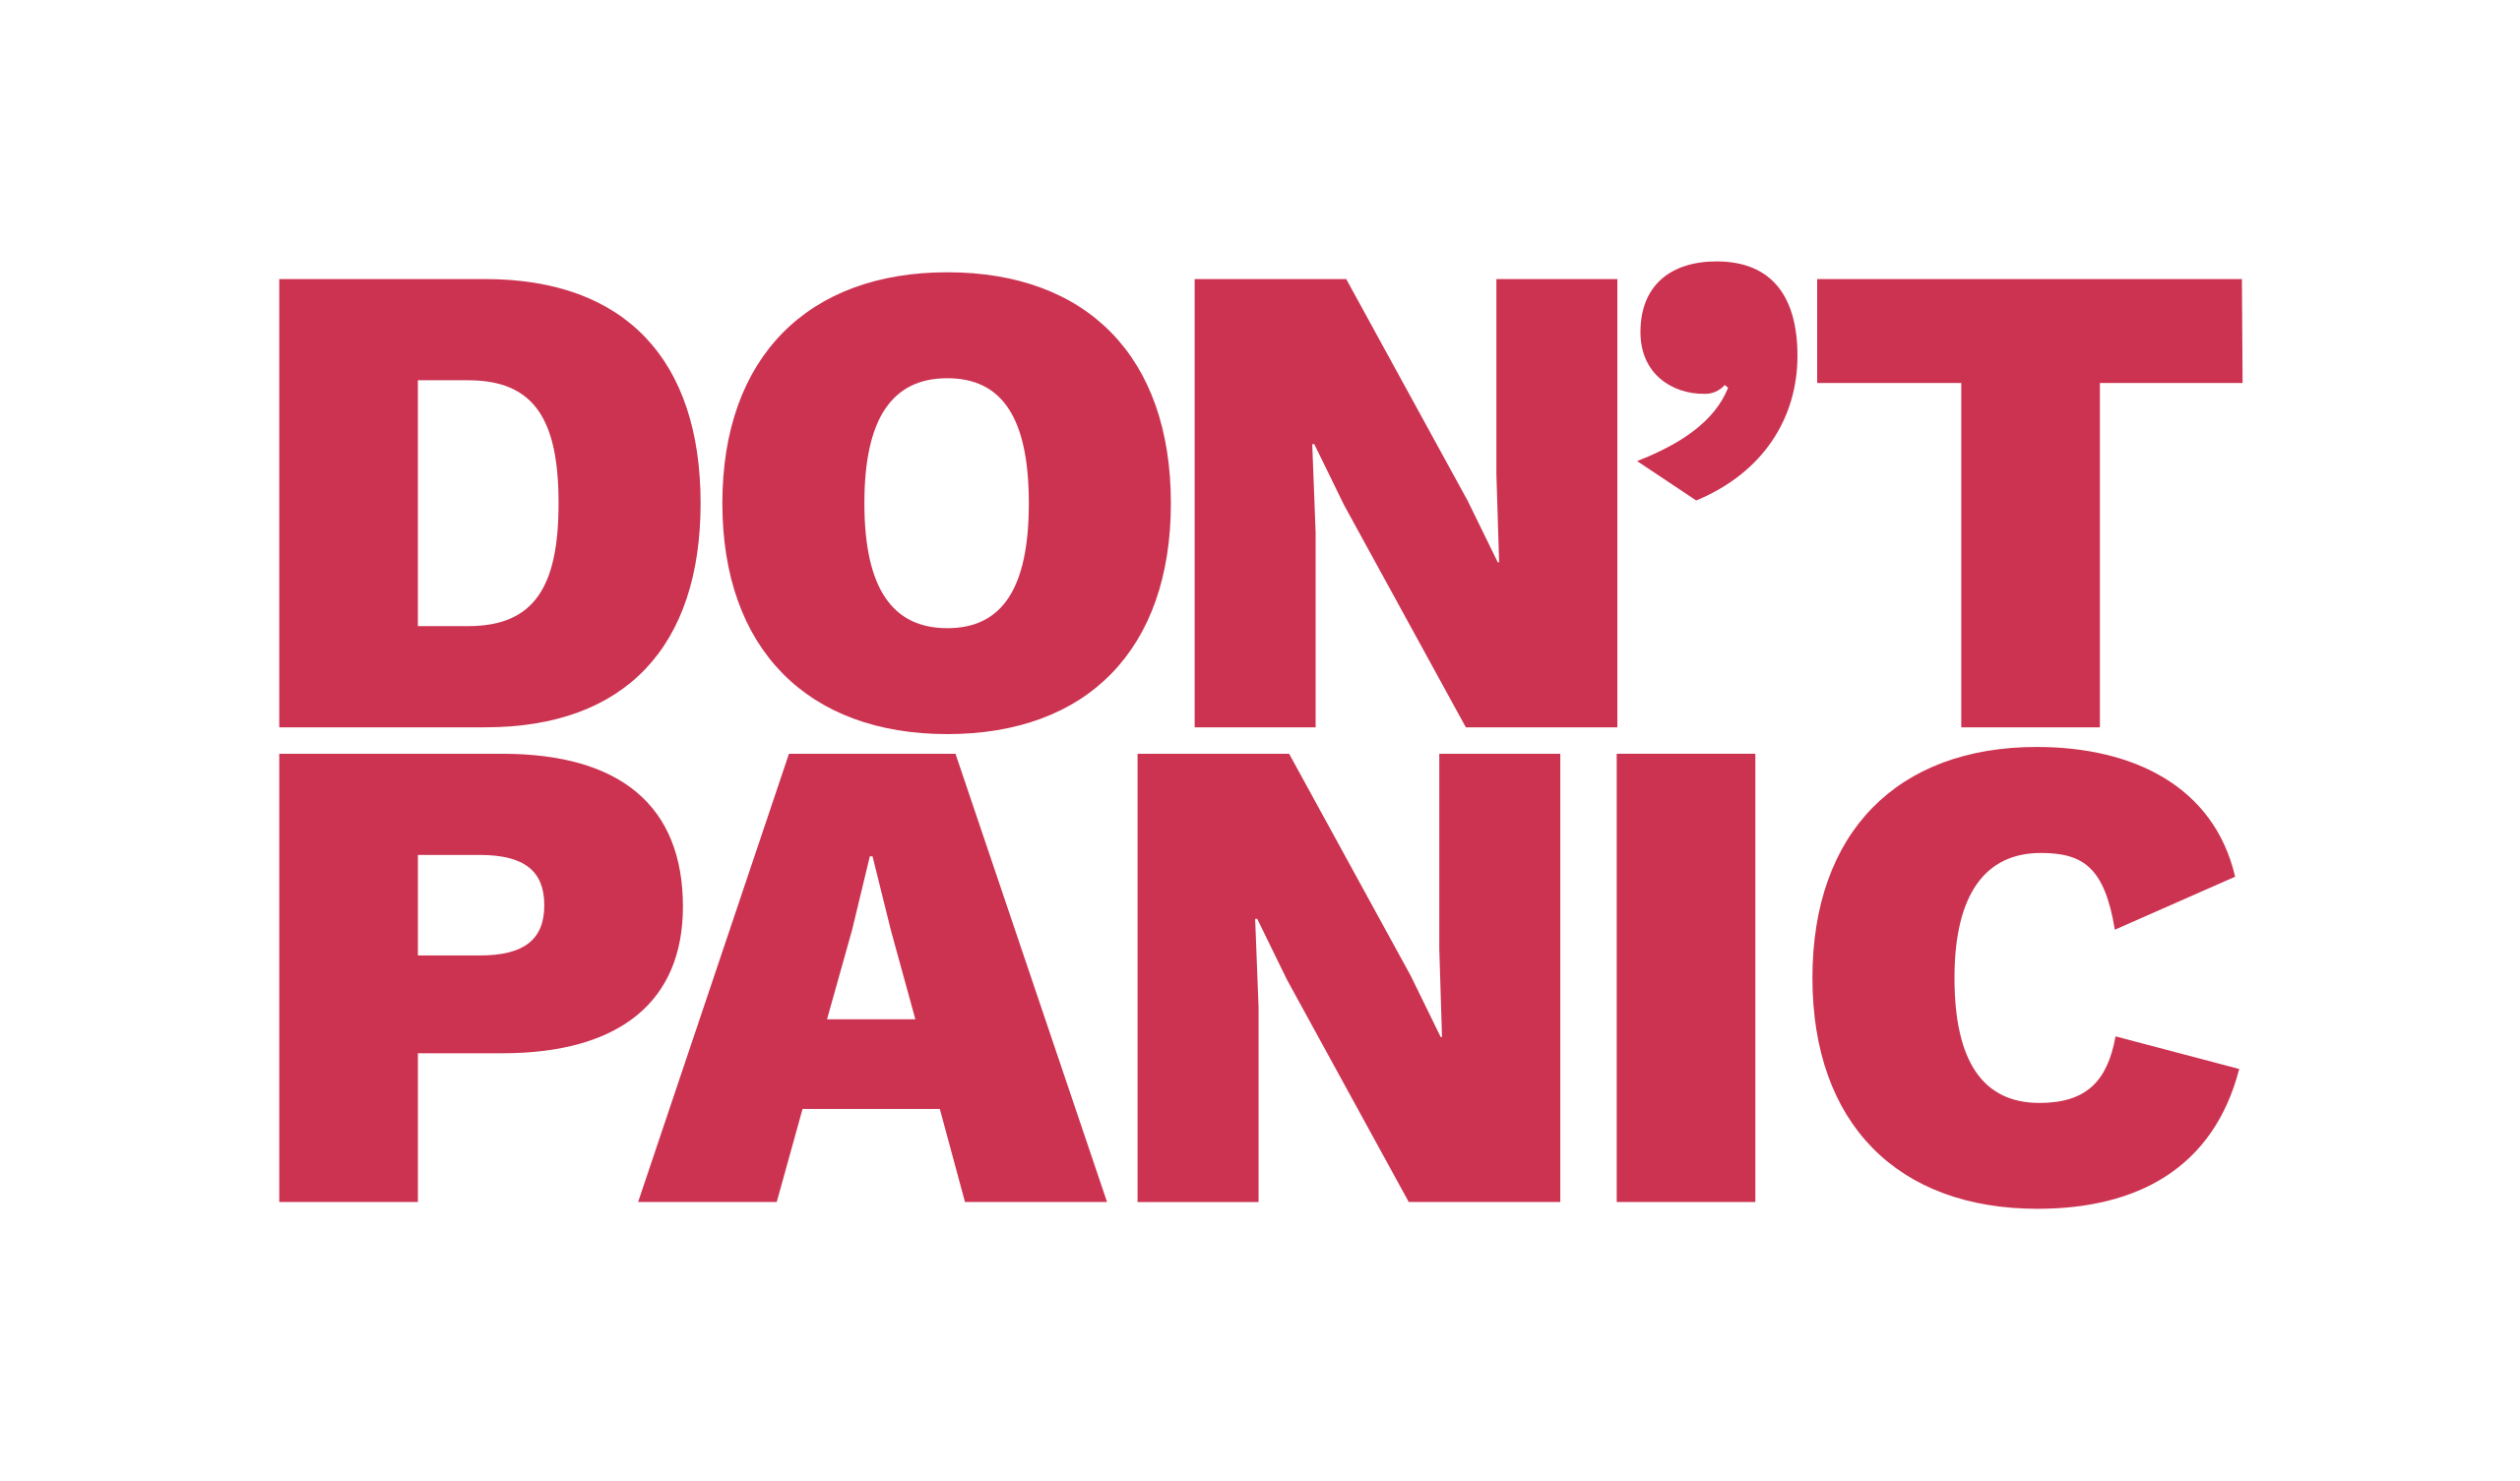 Don't Panic is written in all caps, in big, red block letters.